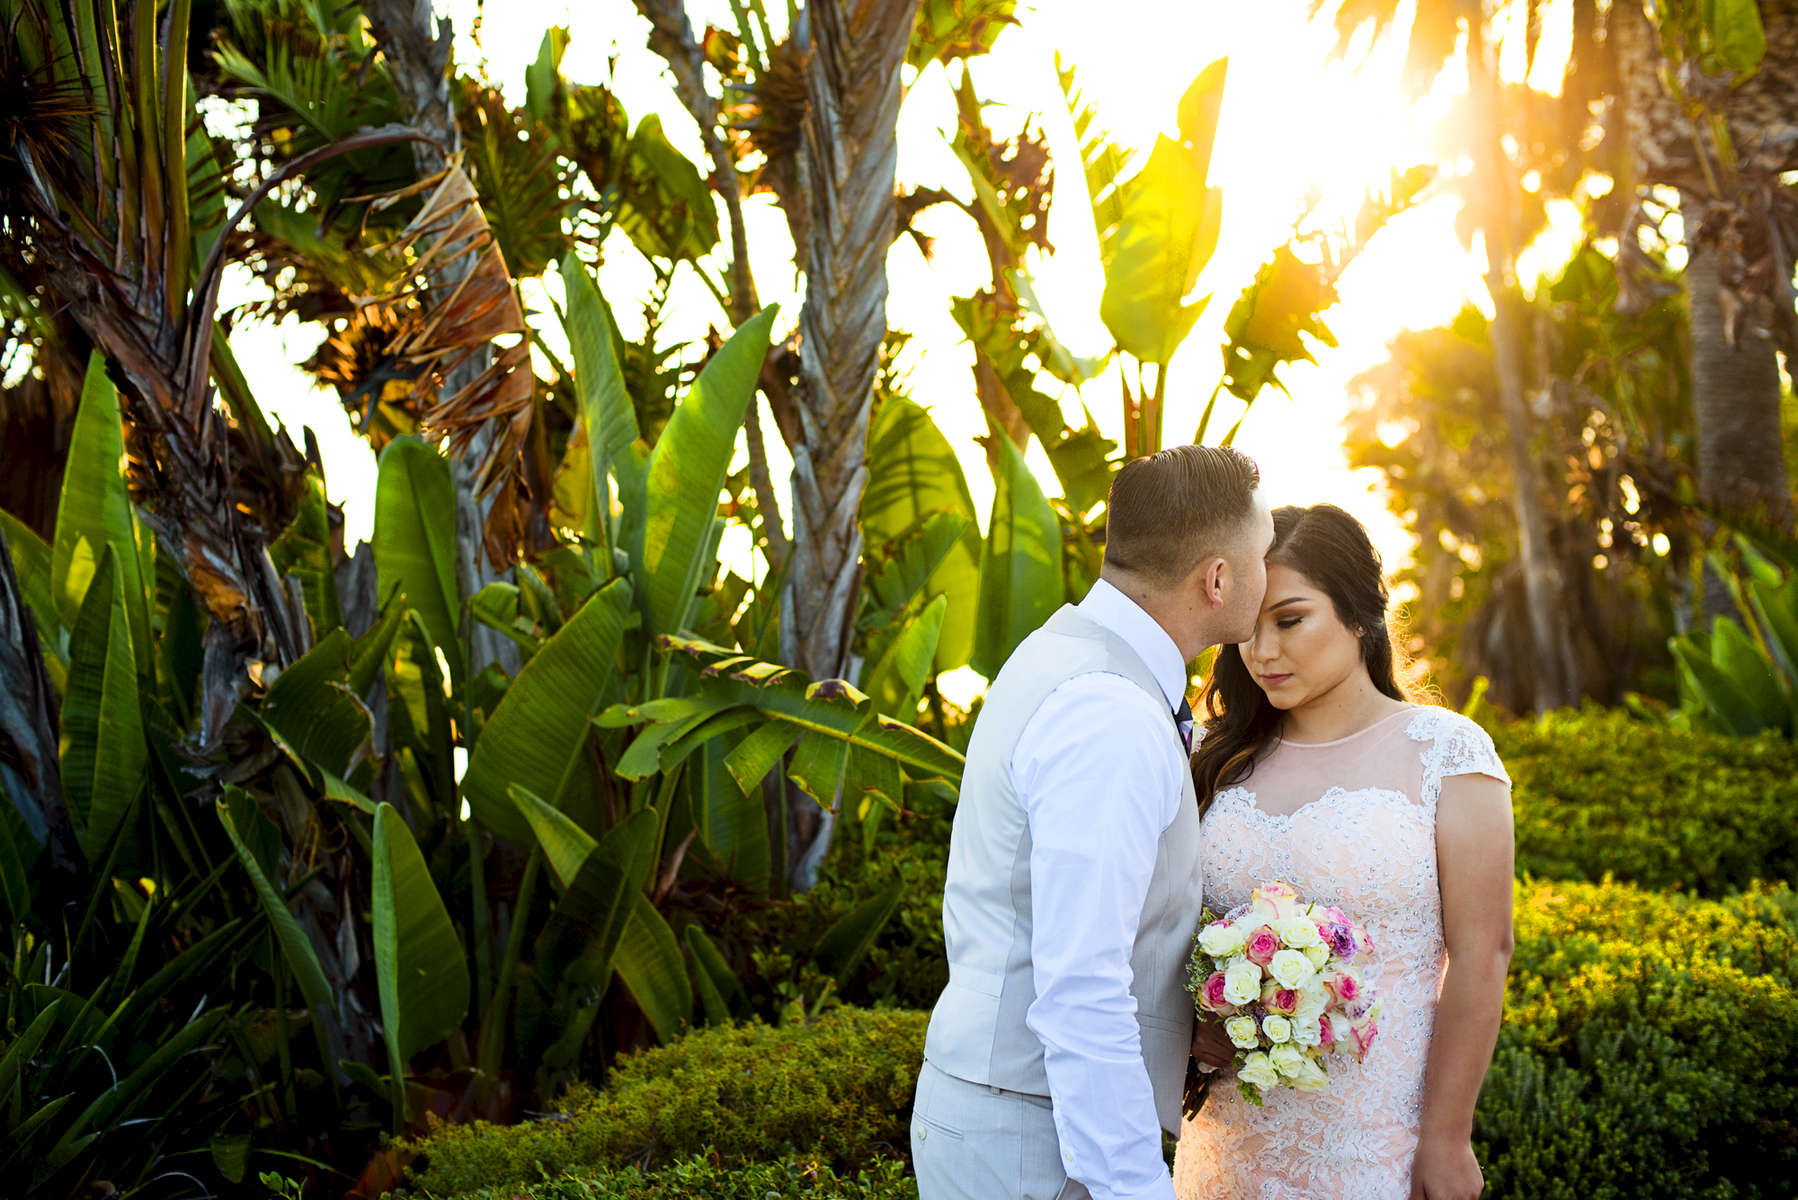 Rudy Avila, 27, and his bride, Yemeni Lopez, 25,from Rancho Cucamonga, Calif., were married at the Laguna Beach Gazebo in Laguna Beach, Calif., surrounded by their closest friends and family members on Saturday, August 20, 2016.  Avila and Lopez have been together for the past seven years after meeting at a mutual friends home and recently gave birth to their son, Jason Avila, 6 months.  The couple is excited to start their next chapter in life beginning with a large family reception equipped with tacos at their home.  (Photo by: Meagan Reidinger © 2016)